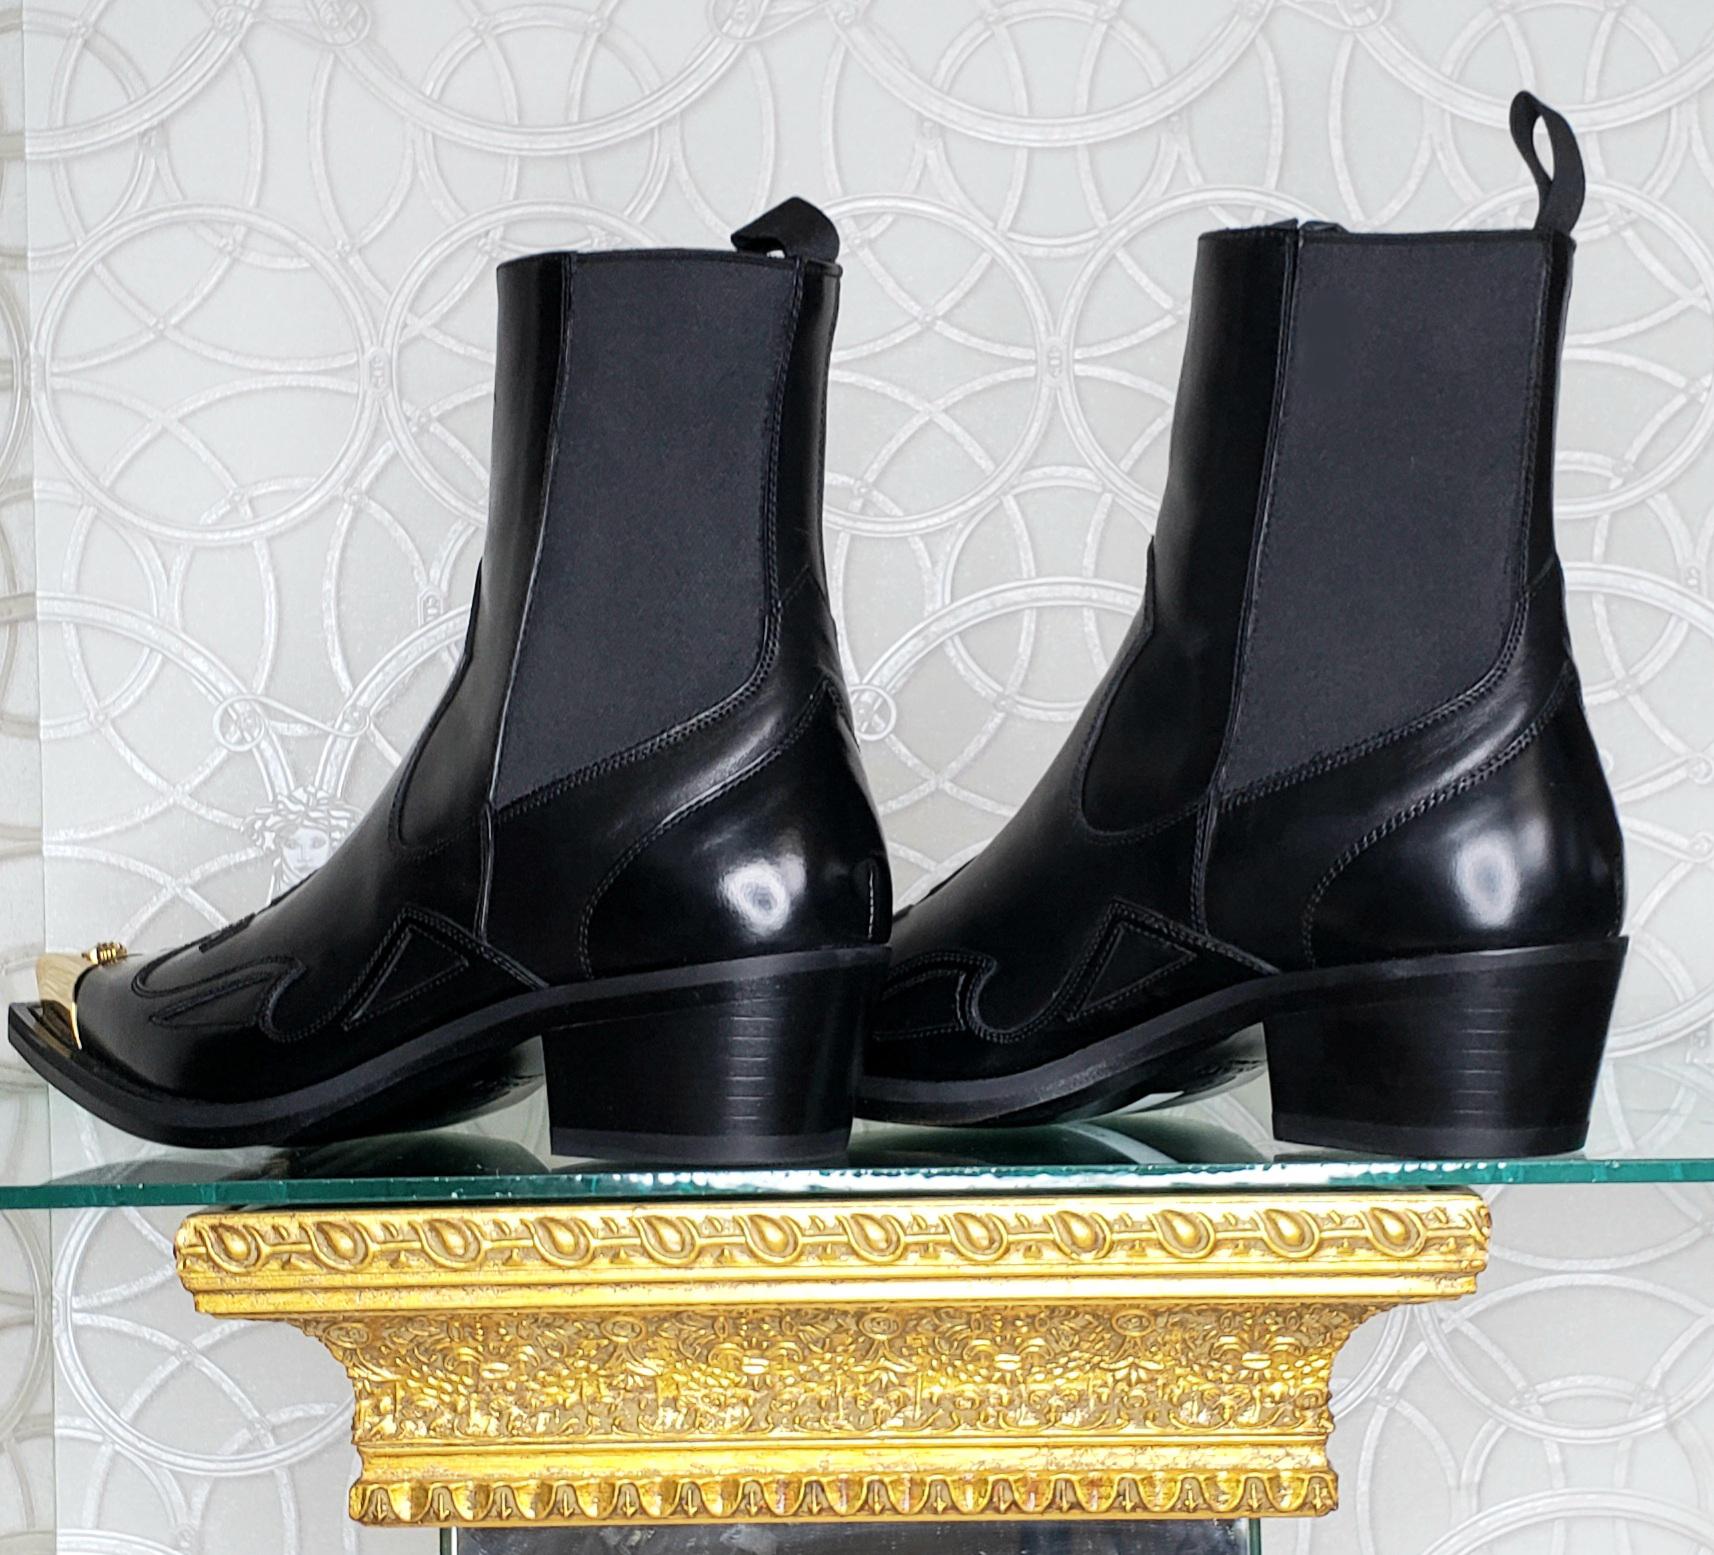 VERSACE GOTHIC SIGNS 24k GOLD PLATED MEDUSA TIPS BLACK LEATHER BOOTS 40.5 - 7.5 2